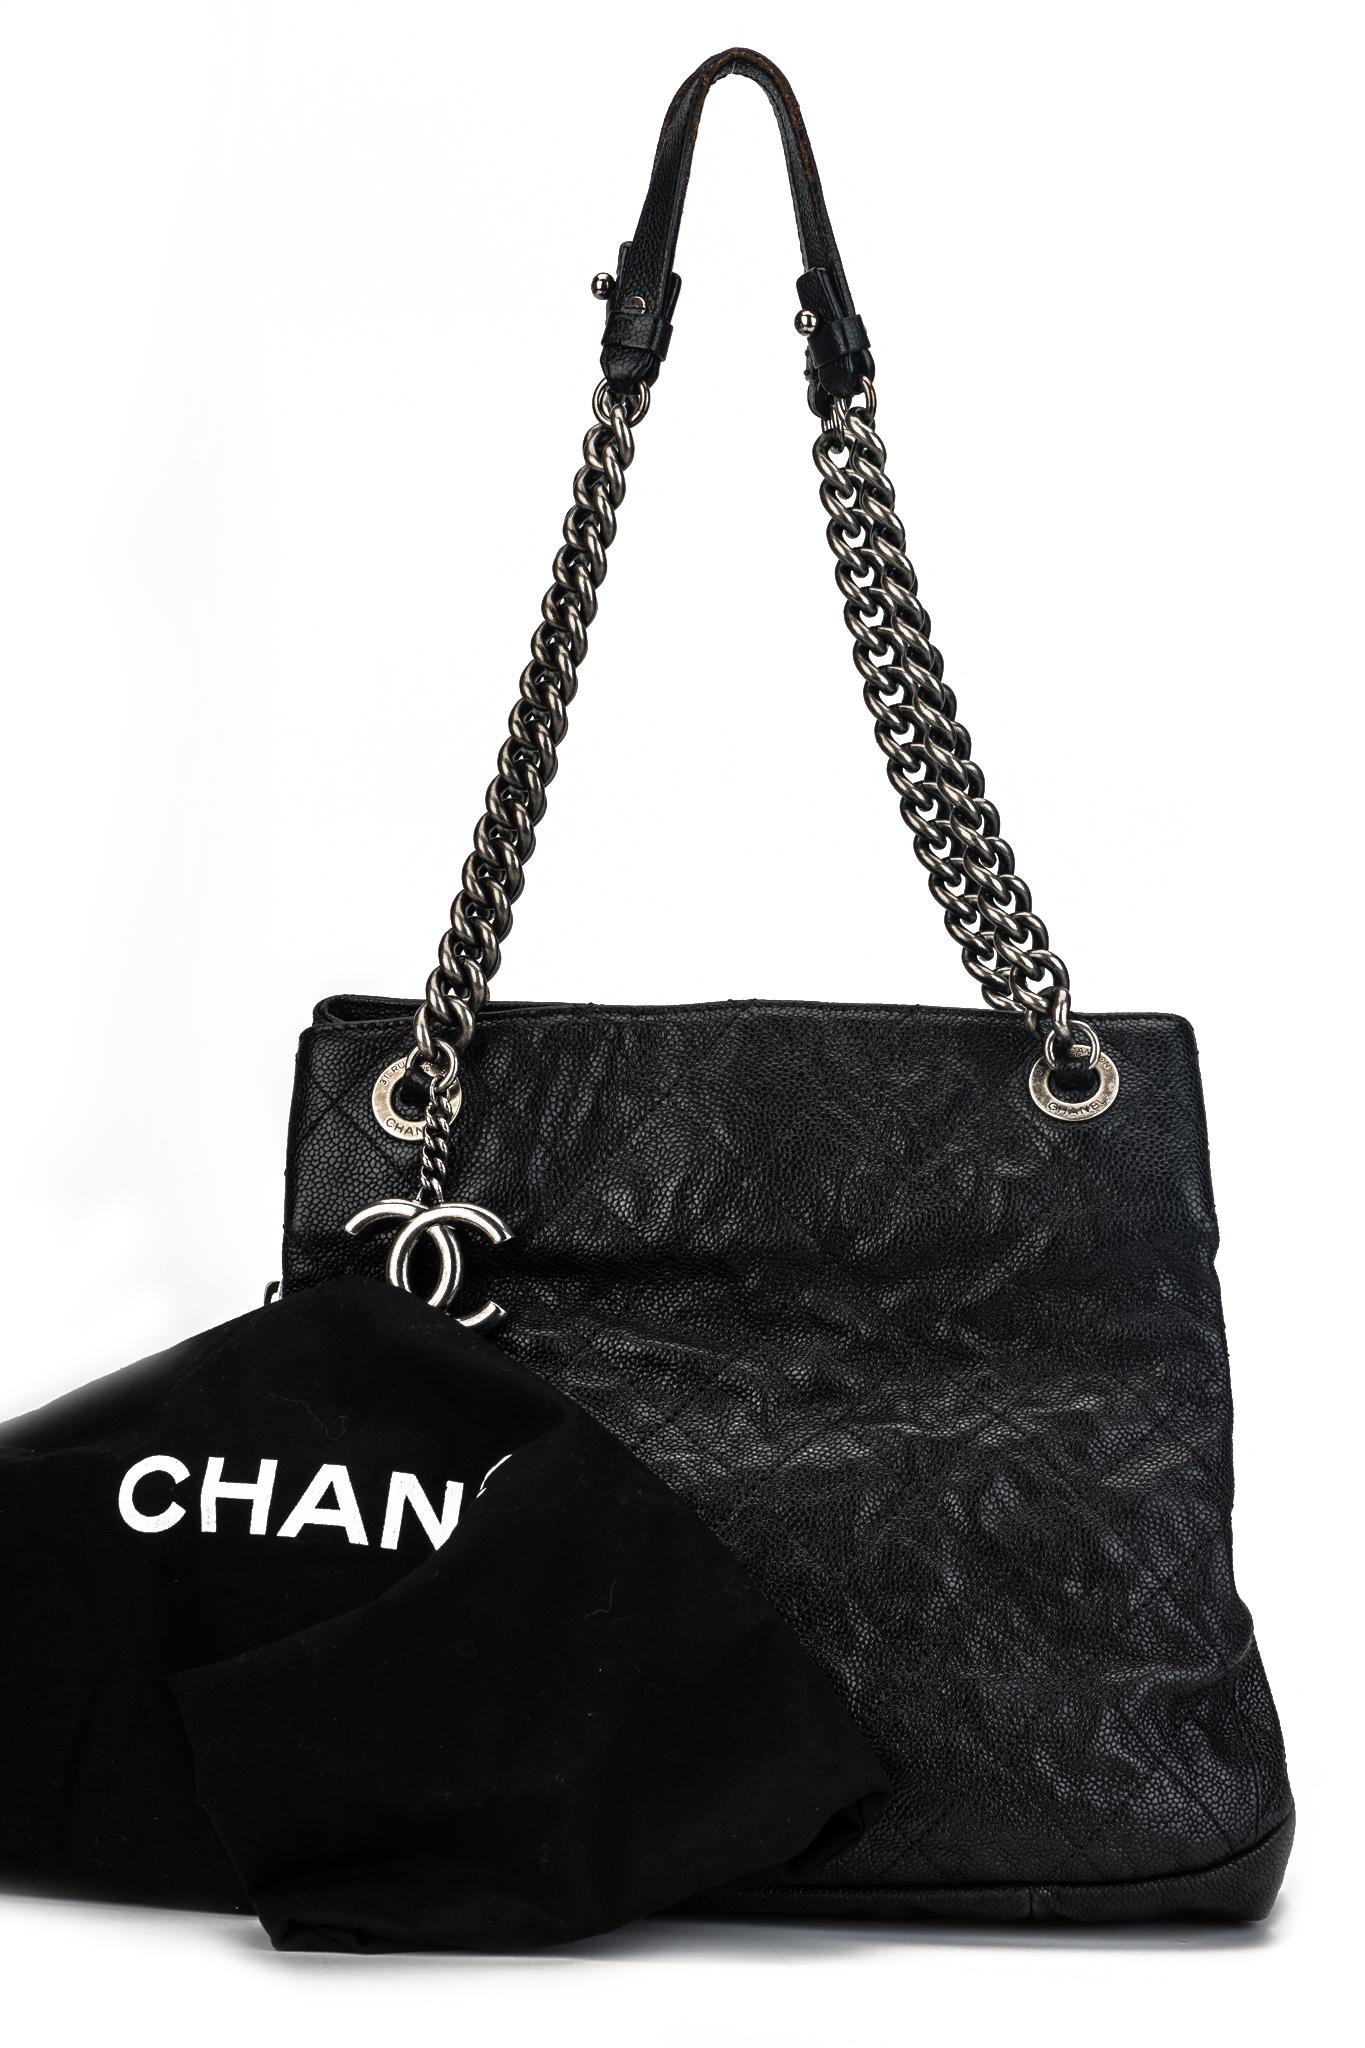 Chanel black caviar lambskin leather with silver tone hardware. Shoulder drop 10